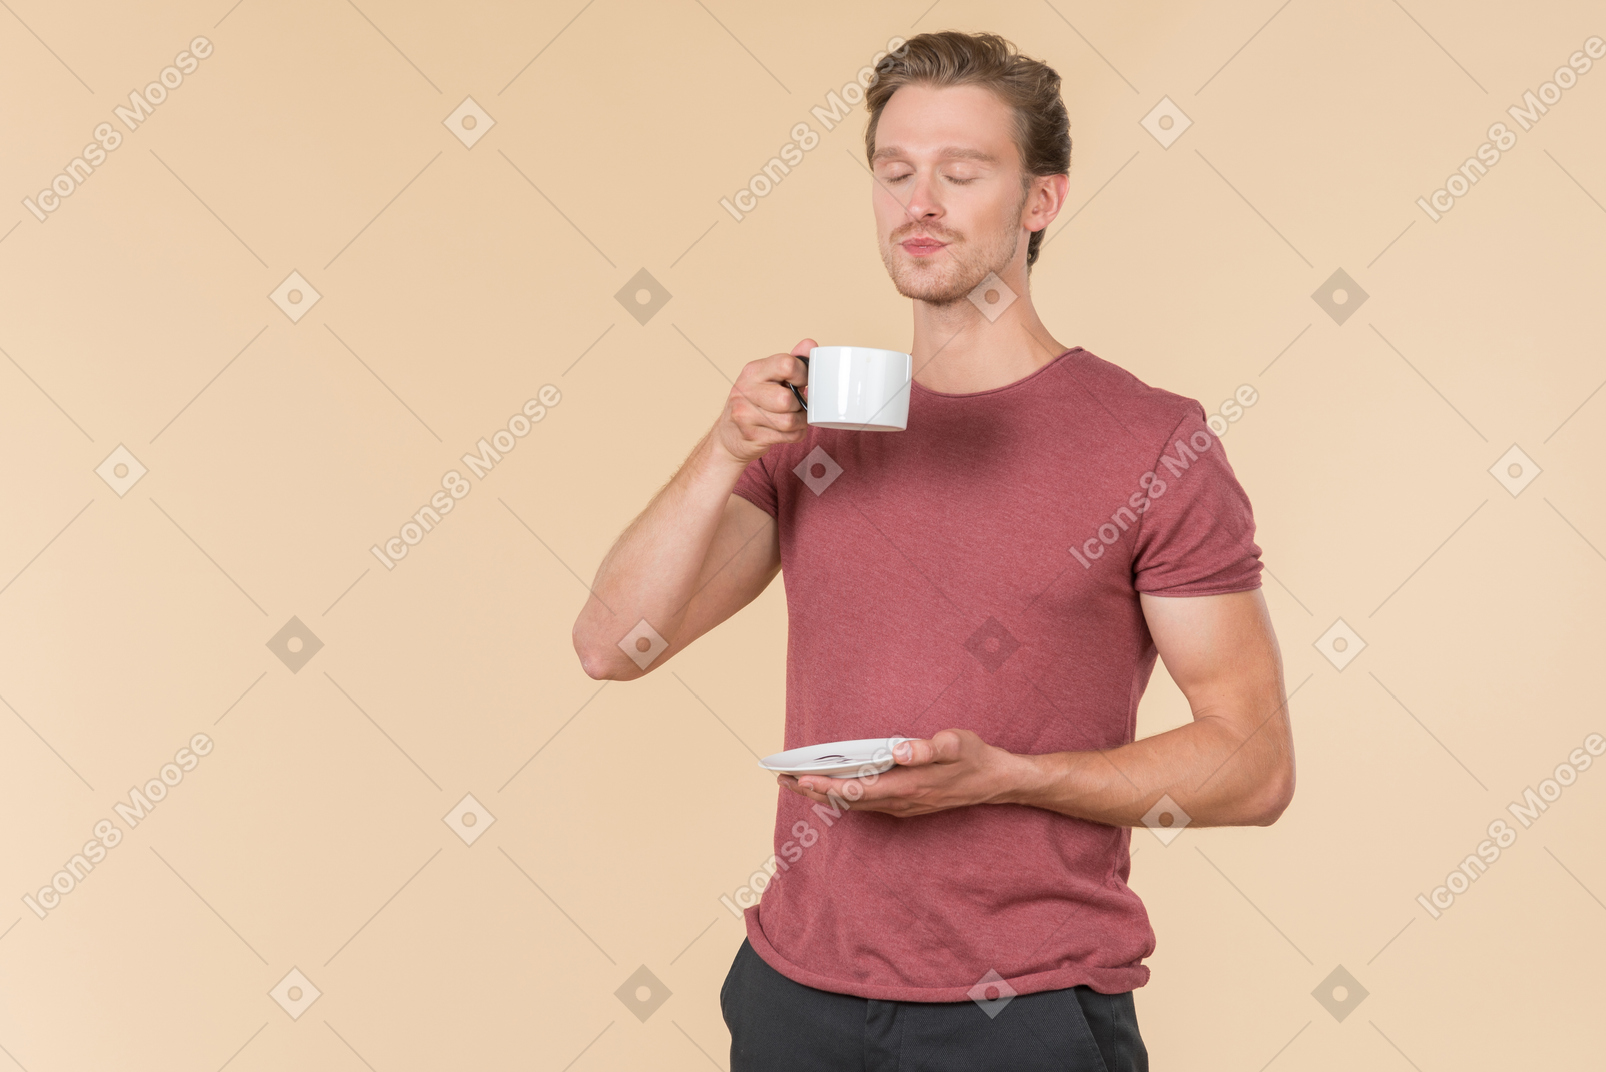 This coffee tastes really great